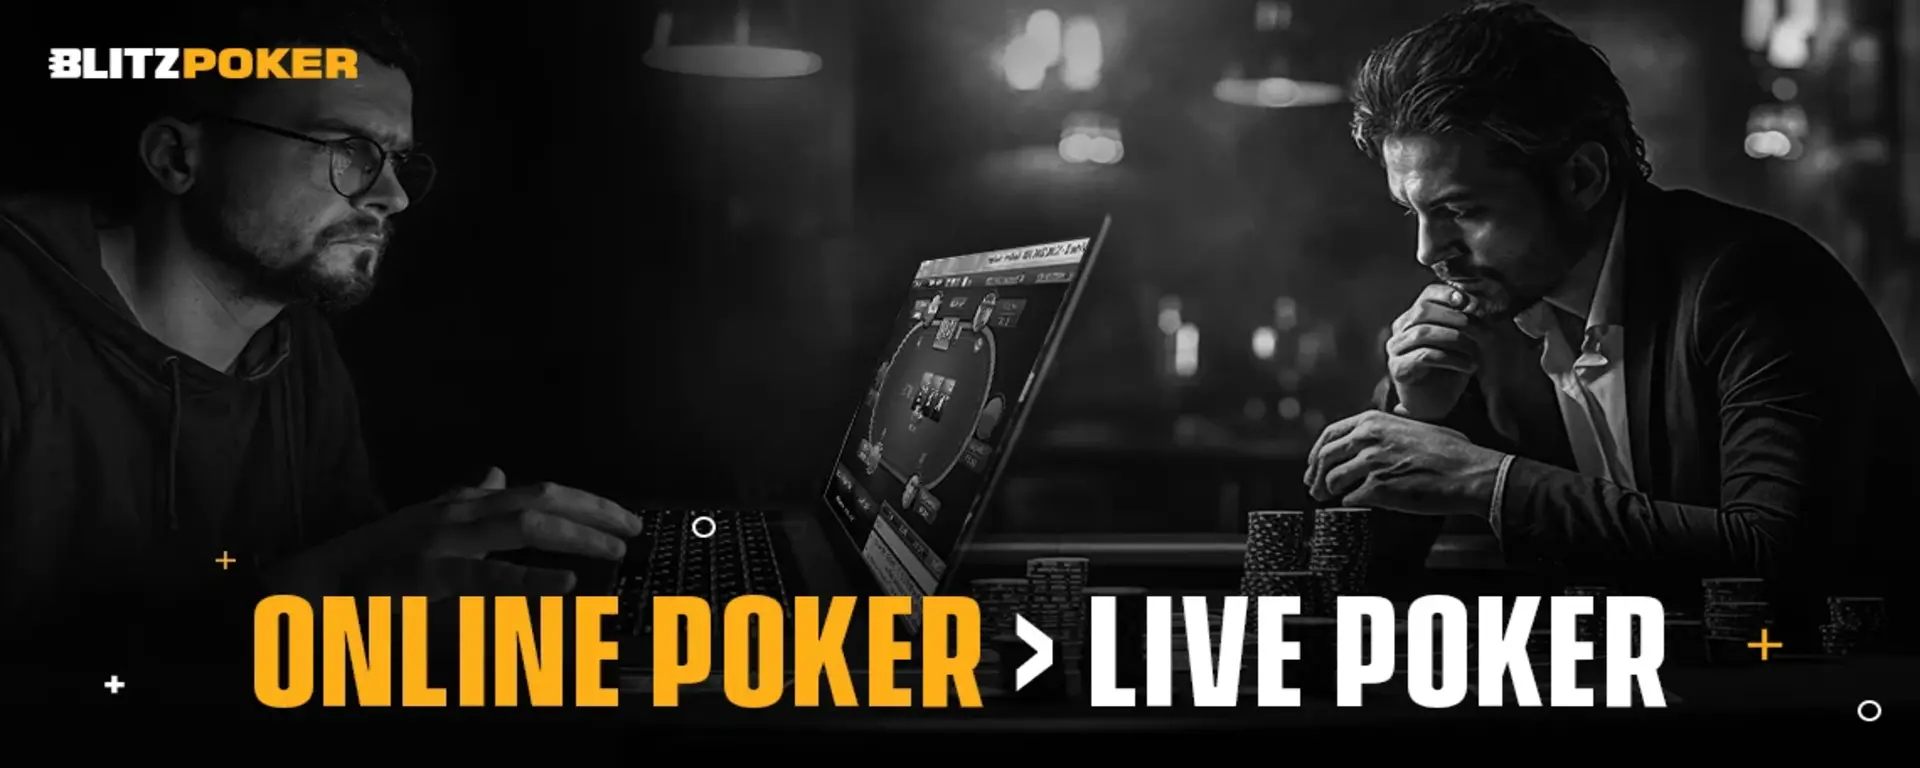 Reasons Why Online Poker Is Better than Live Poker